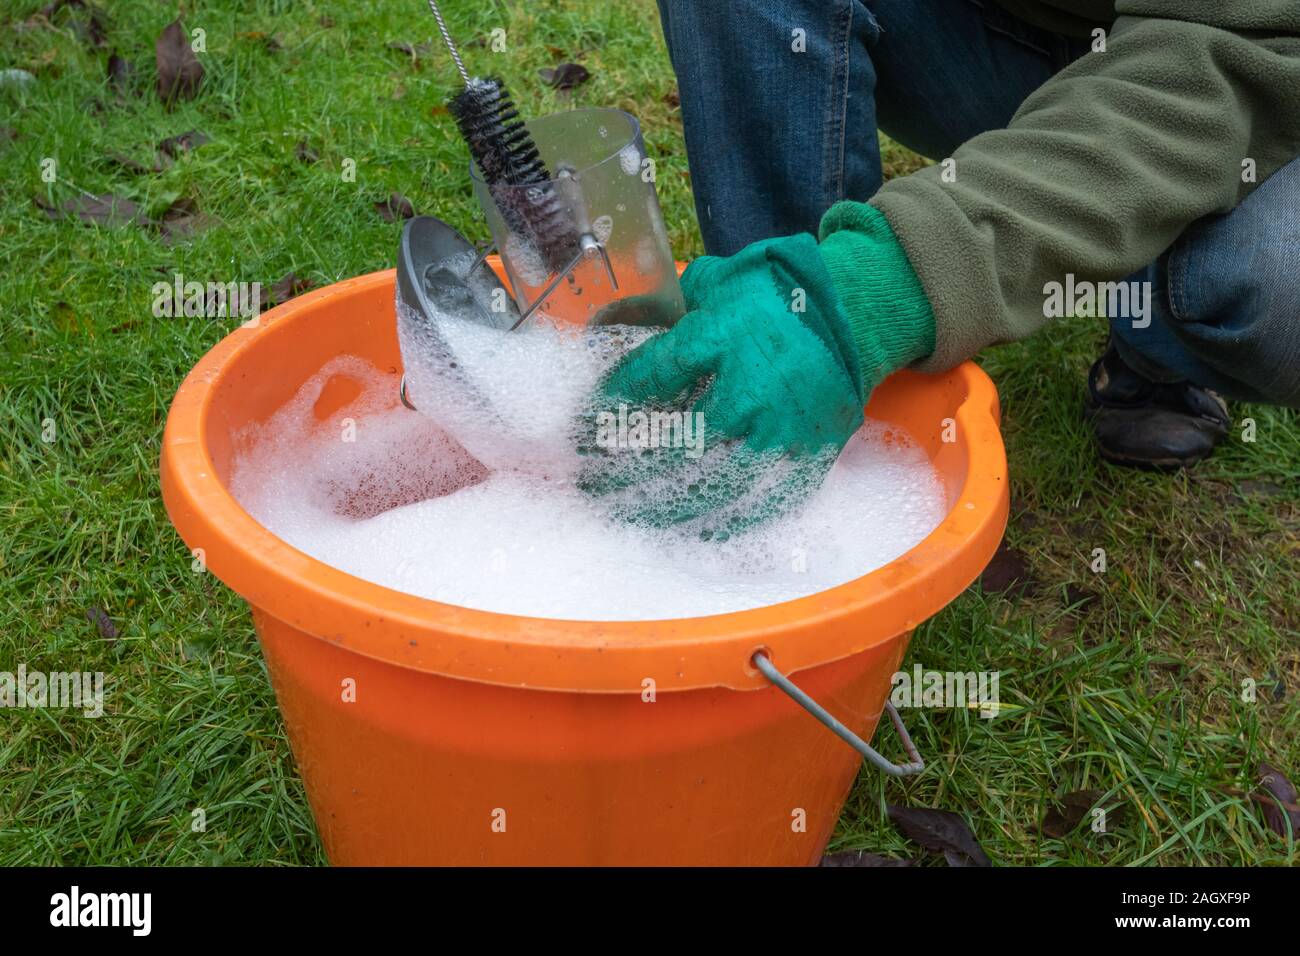 Washing Clothes In A Bucket Of Water. Stock Photo, Picture and Royalty Free  Image. Image 11764670.